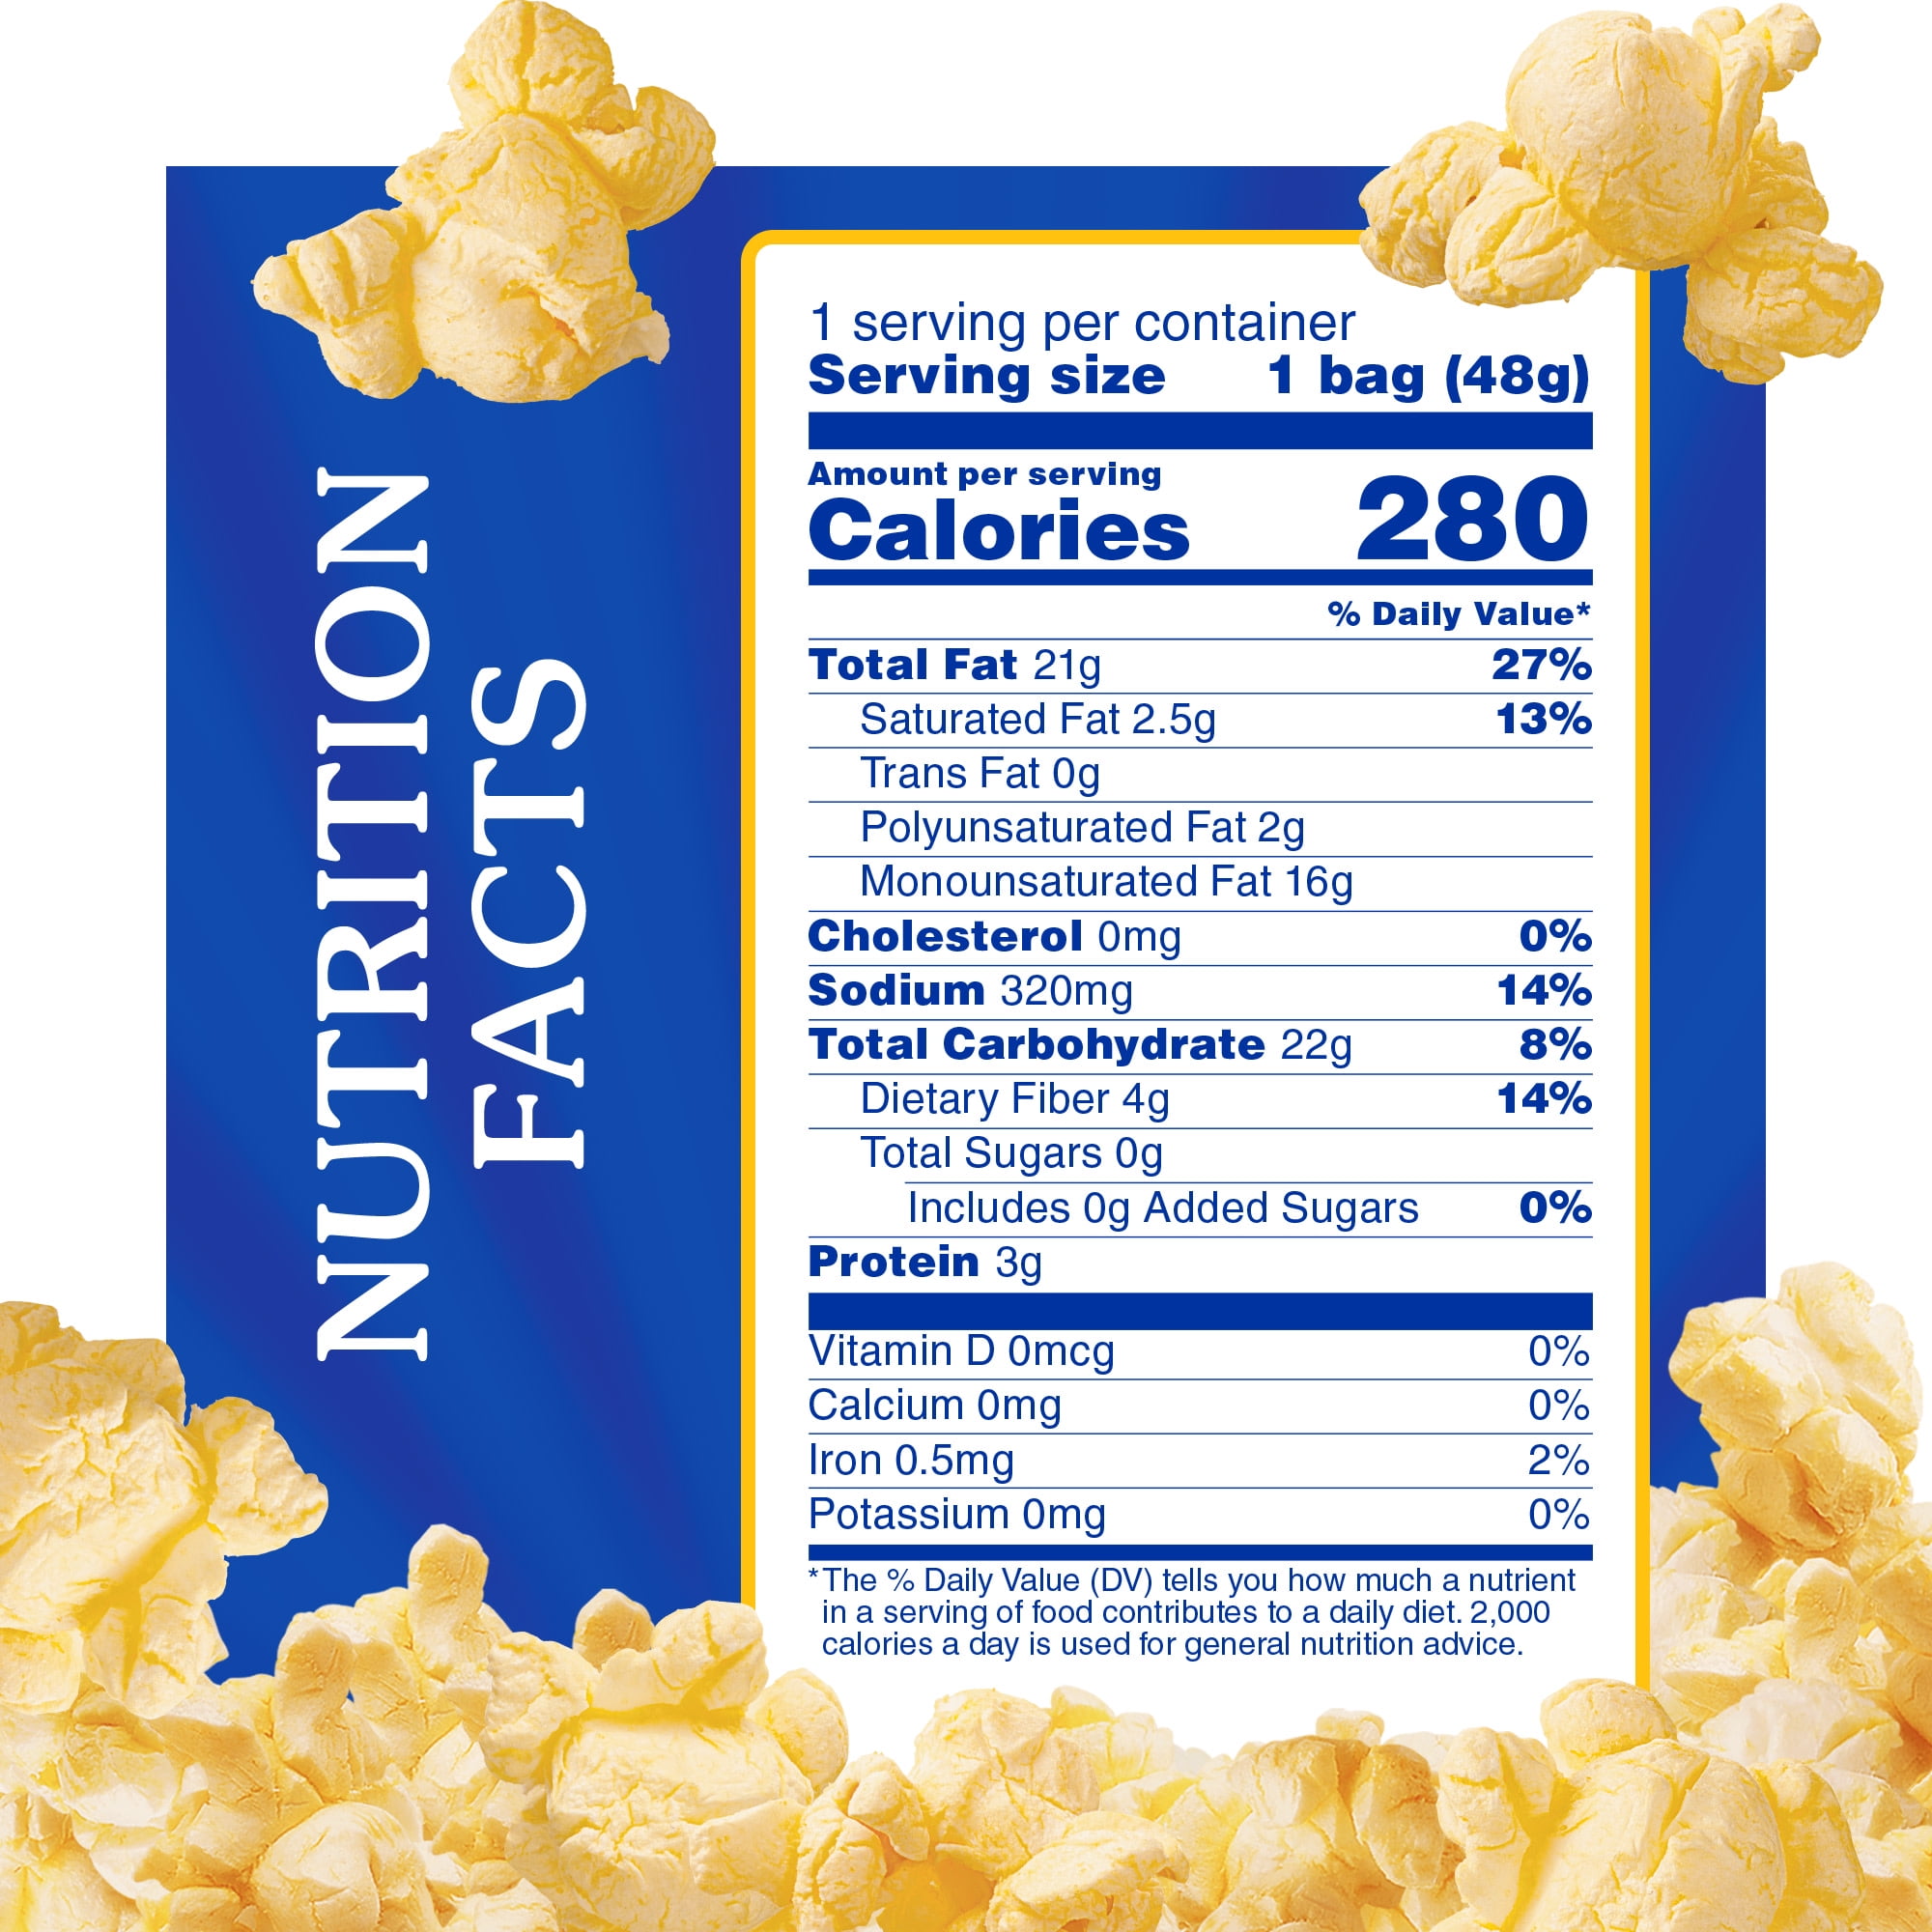 Act II Butter Lovers Party Size Popcorn (8.5 oz)